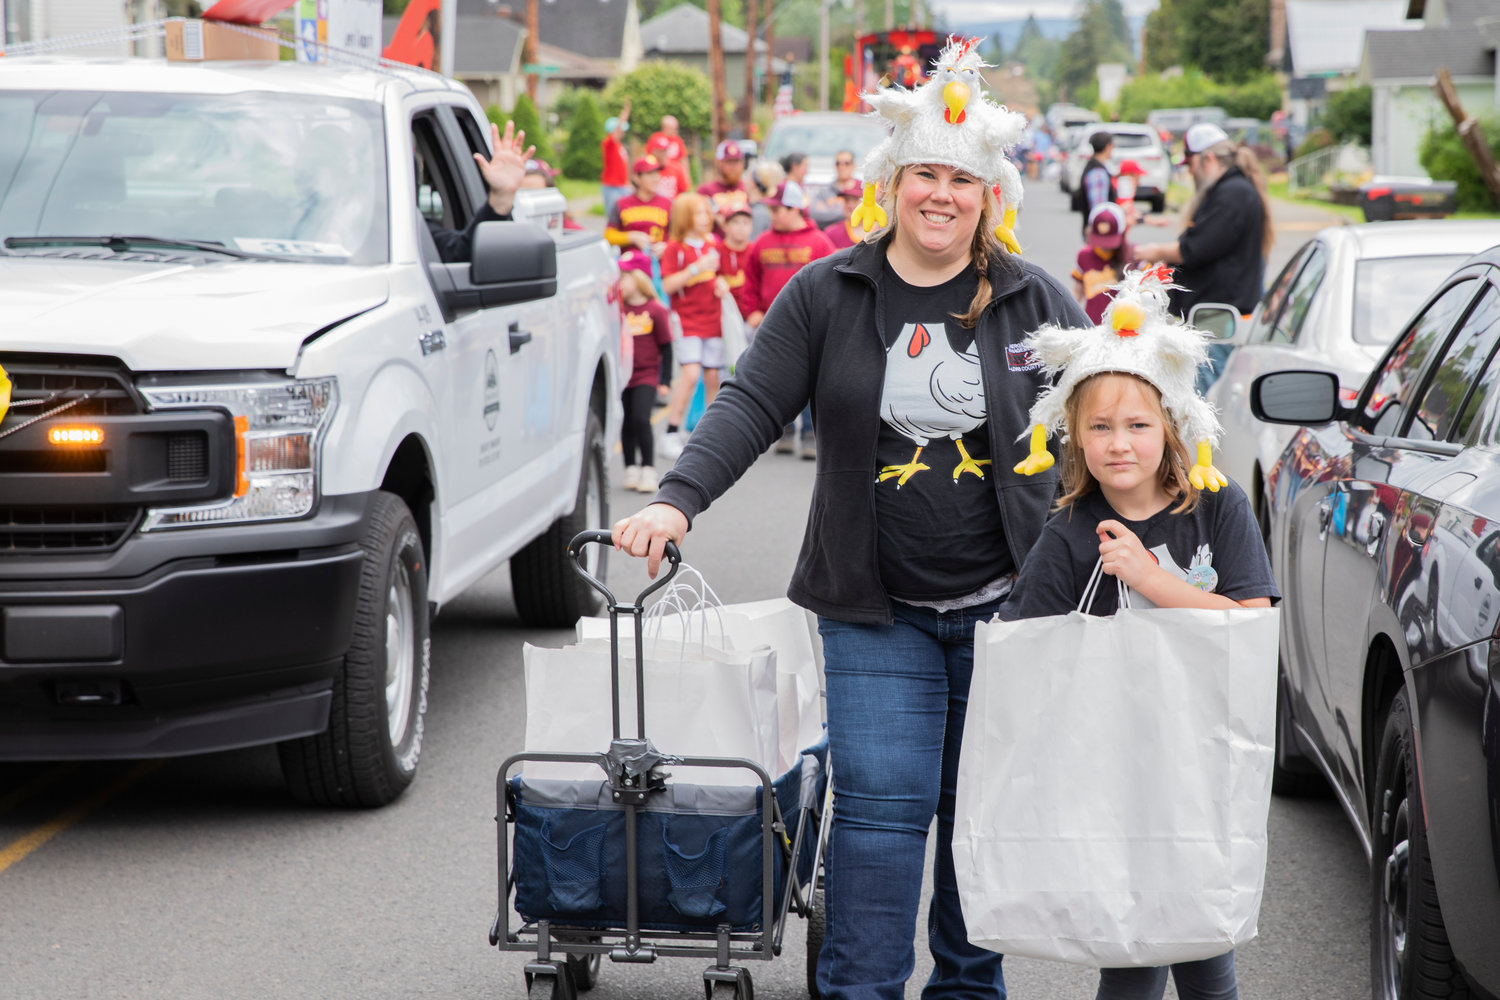 Erika Katt smiles while pulling a wagon with bags full of plastic eggs and candy during the Egg Days Festival parade in Winlock on Saturday.